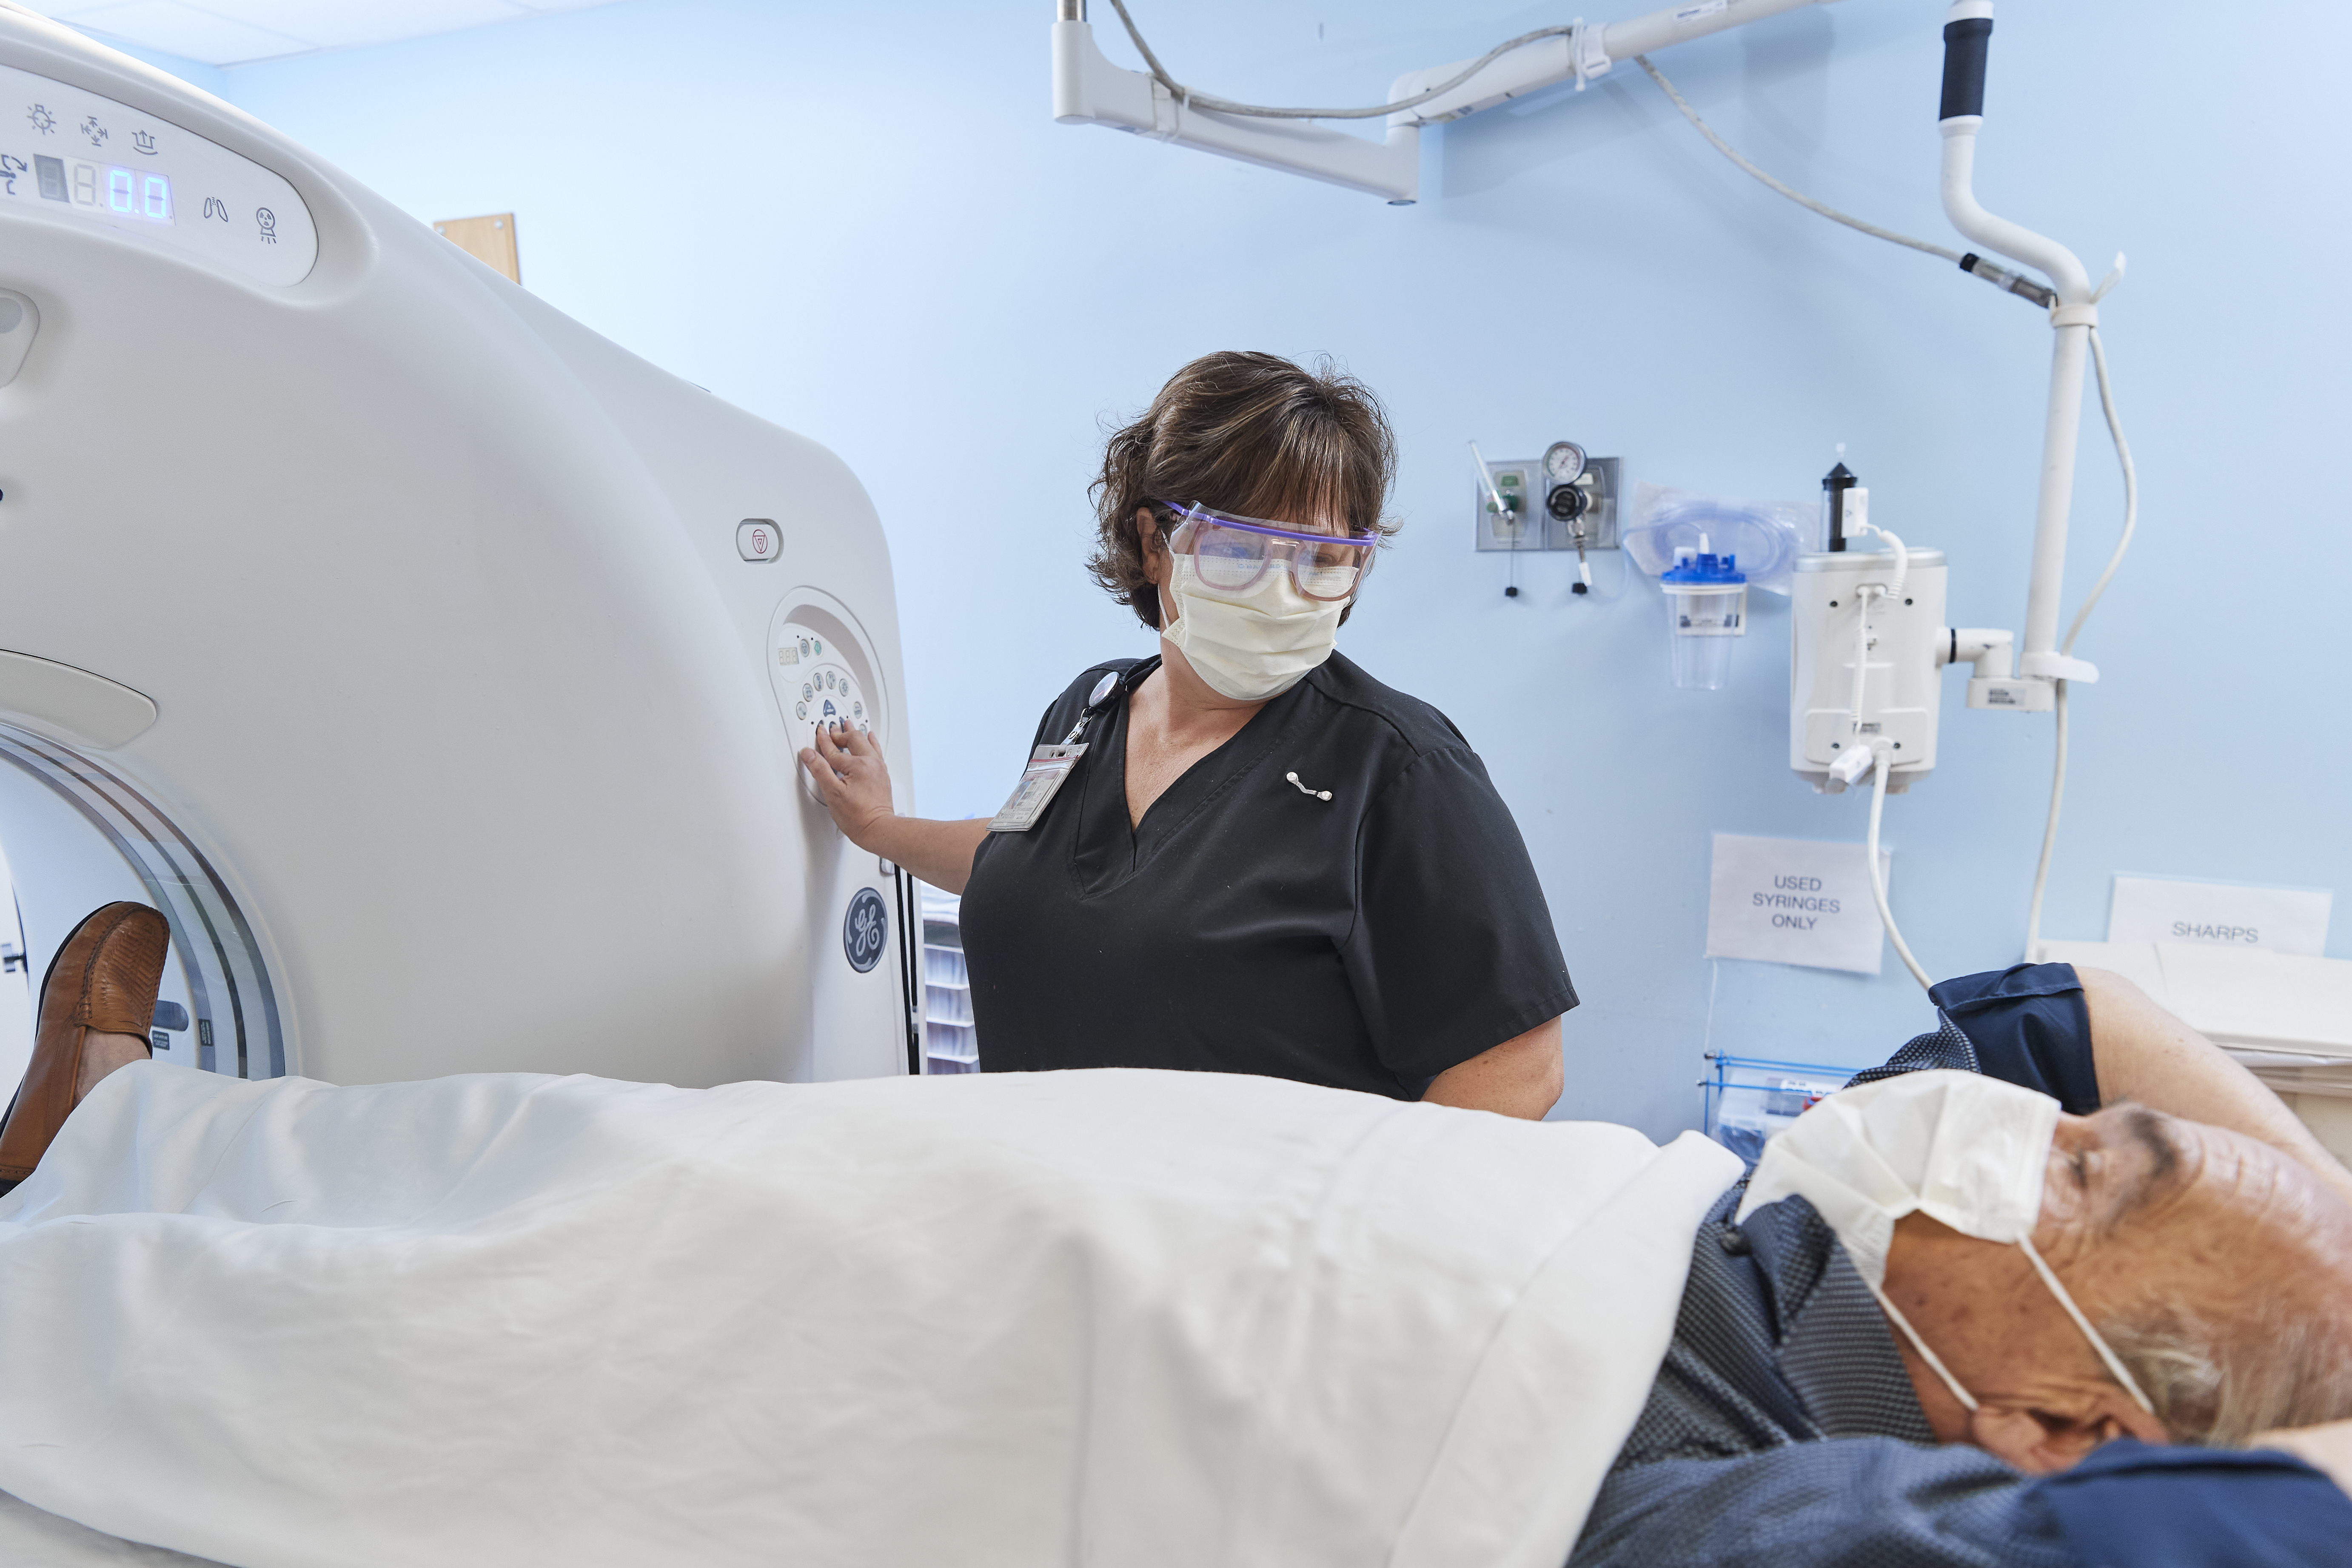 A Temple lung patient undergoes a scan